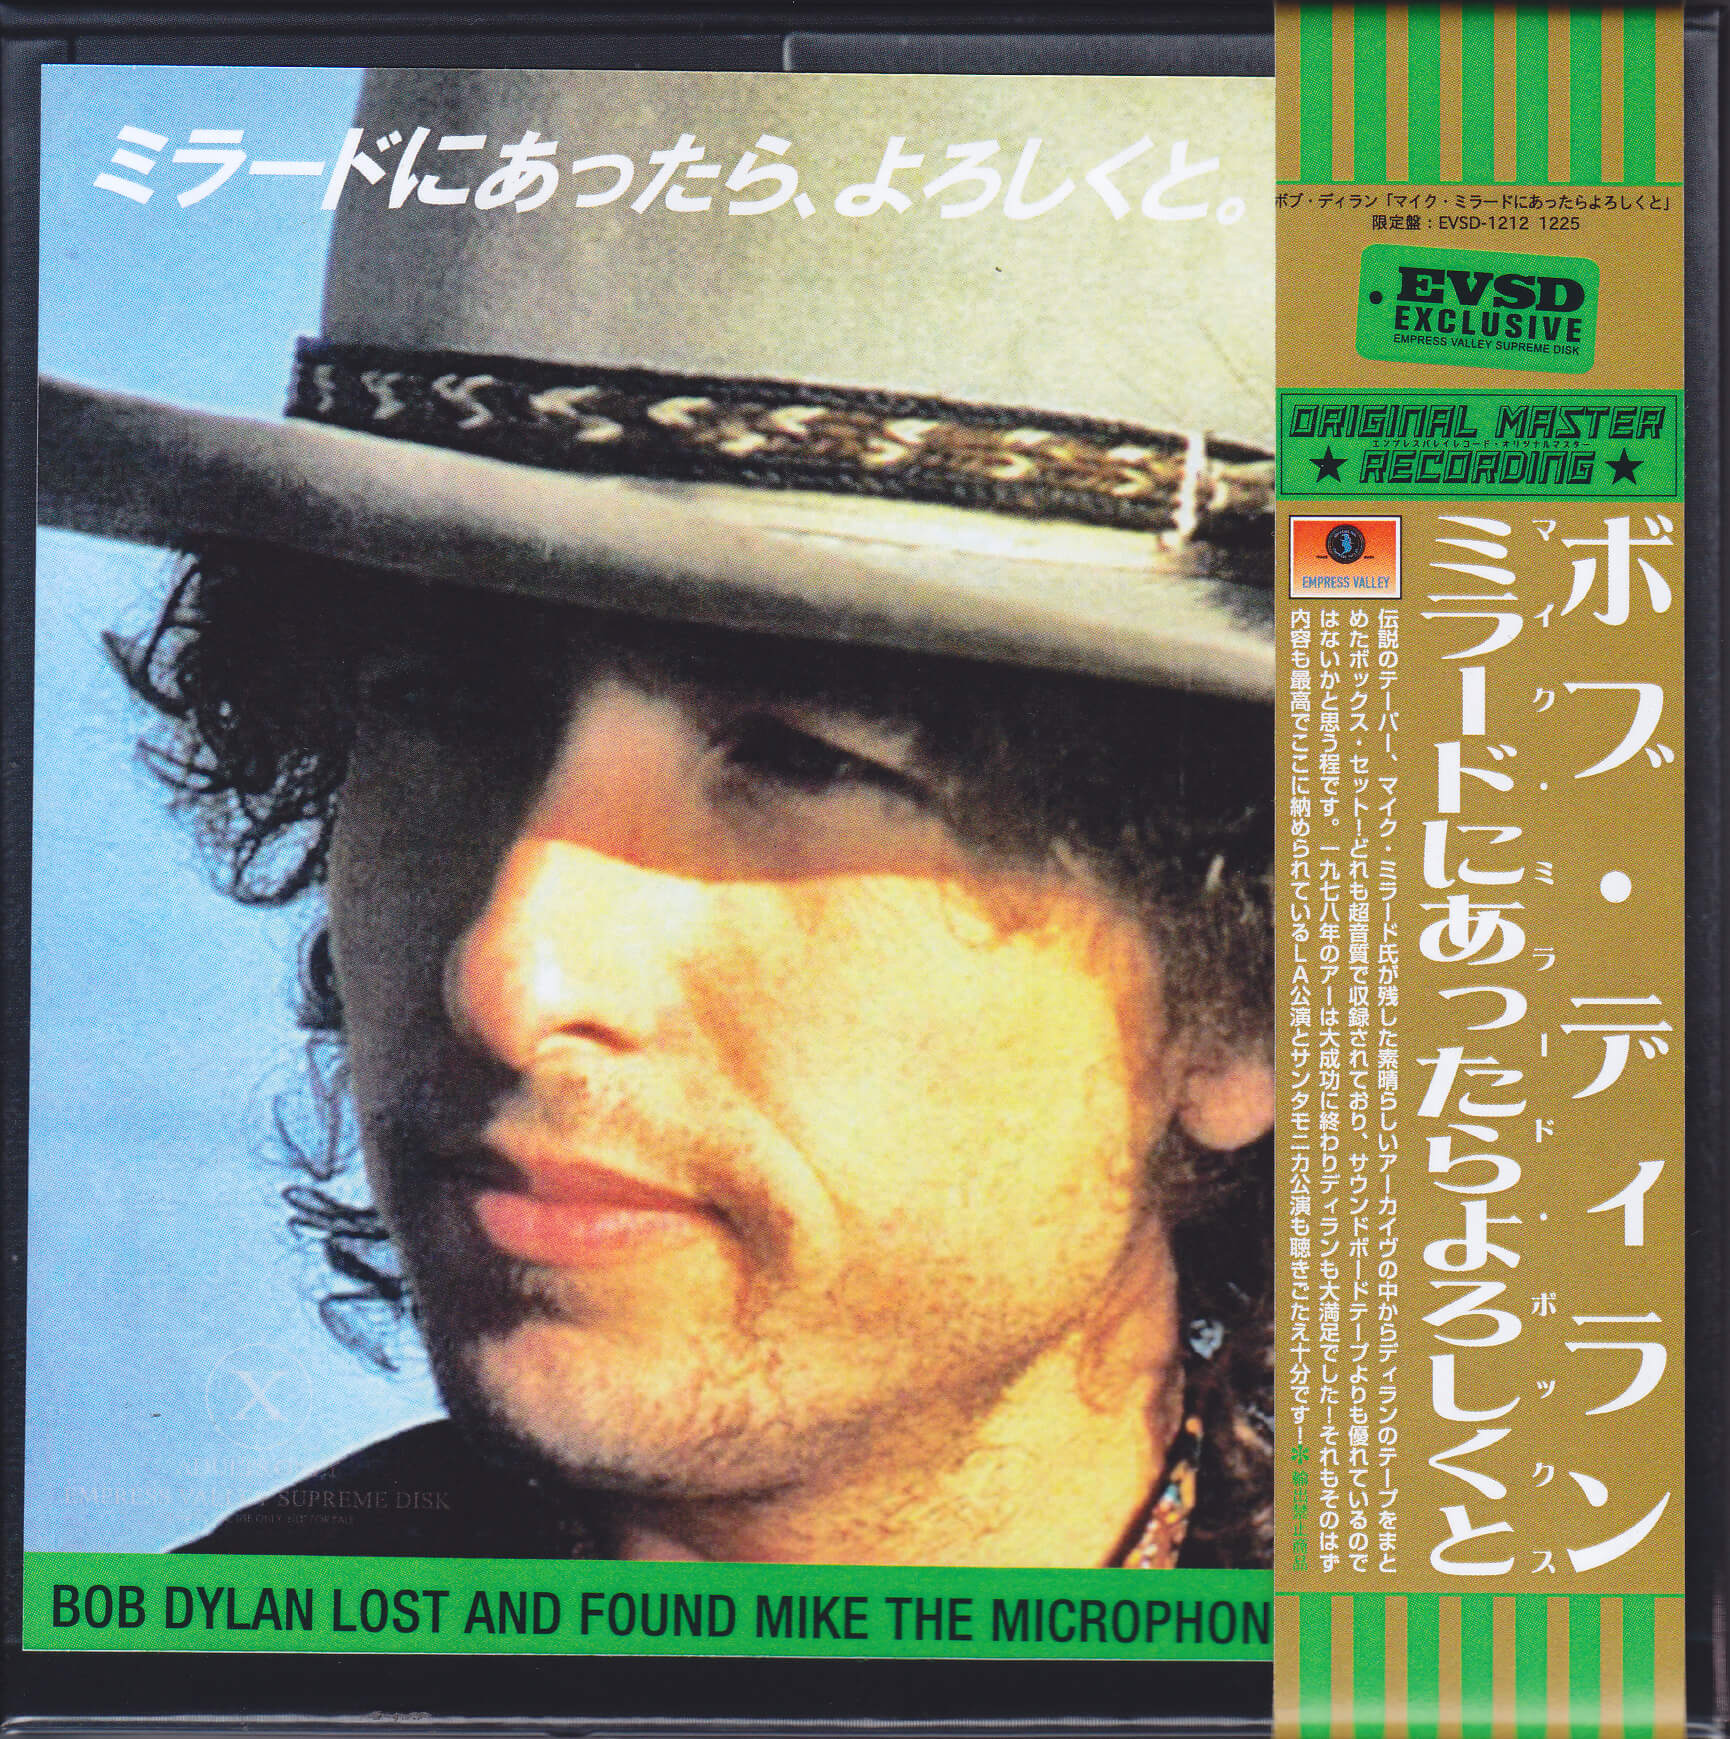 Bob Dylan / Lost And Found Mike The Microphone Tapes / 7CD Box Set